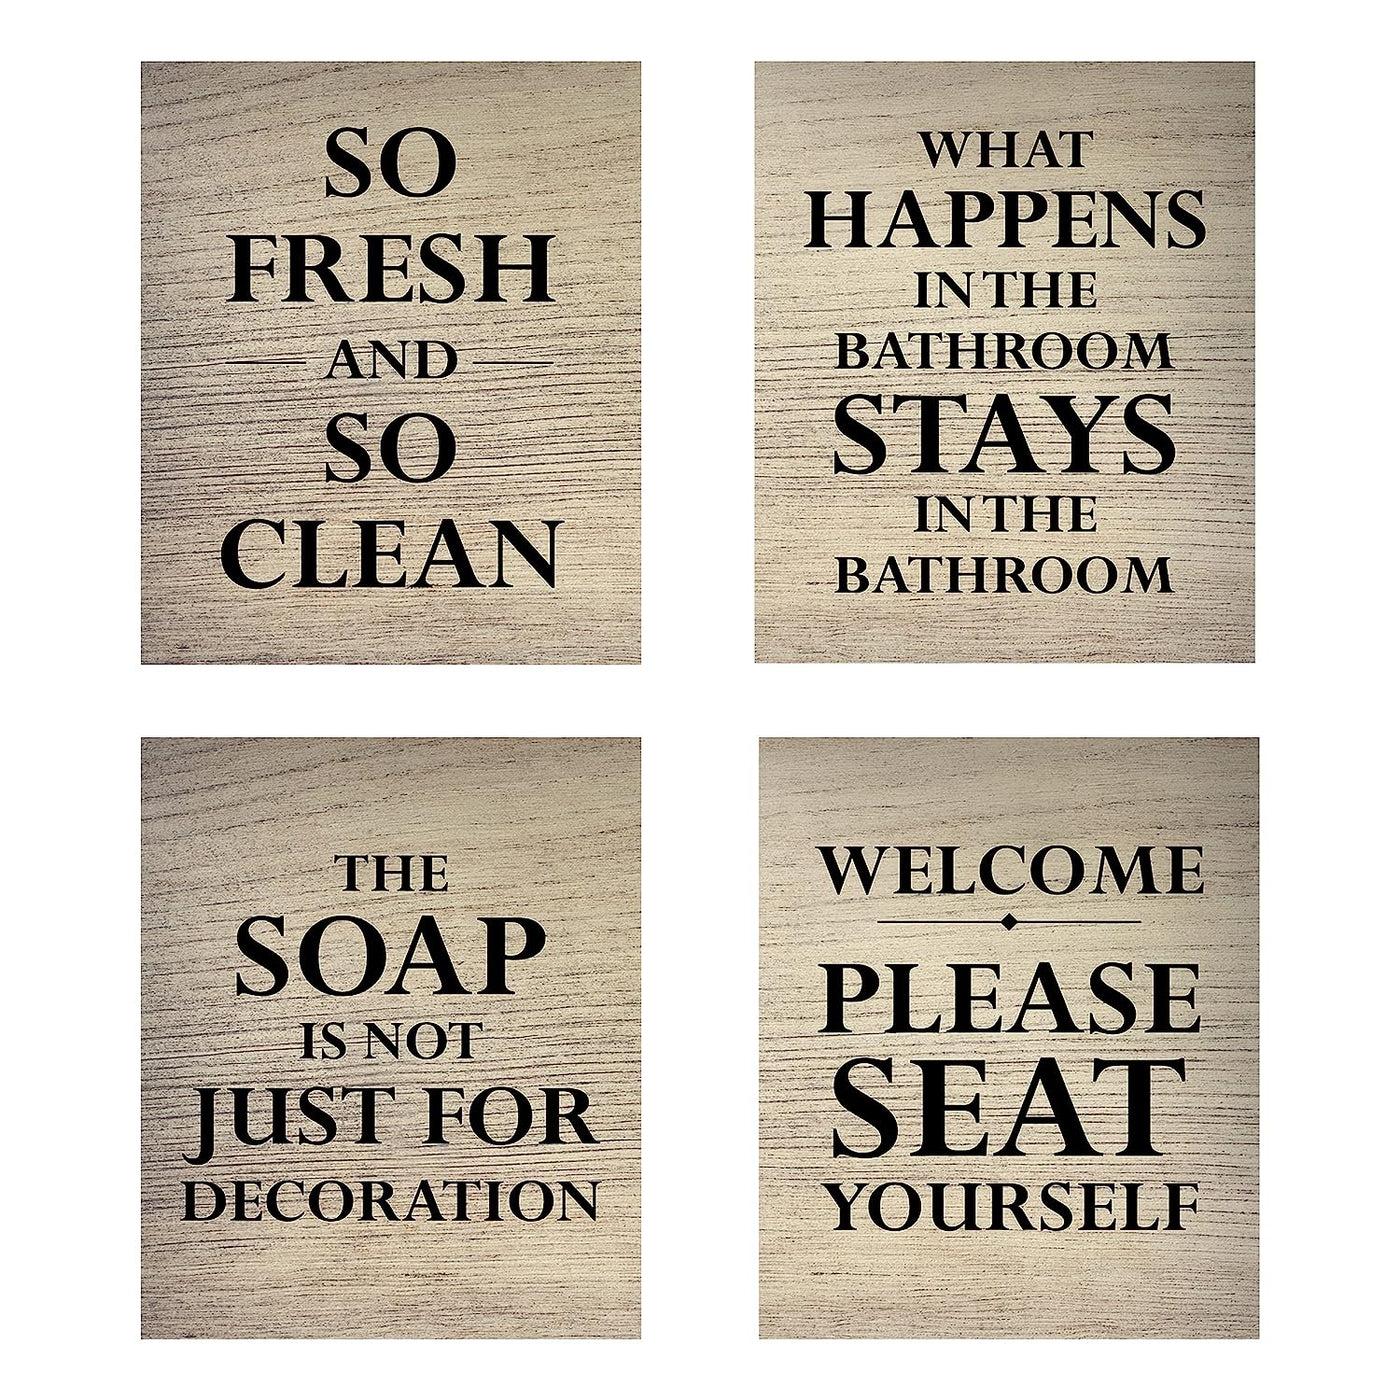 So Fresh So Clean Funny Bathroom Decor-Set of (4)-8 x 10" Wall Prints-Ready to Frame. Humorous Signs-"Welcome-Please Seat Yourself"-"Soap Not Just For Decoration" Fun Home-Guest Bathroom Decor!